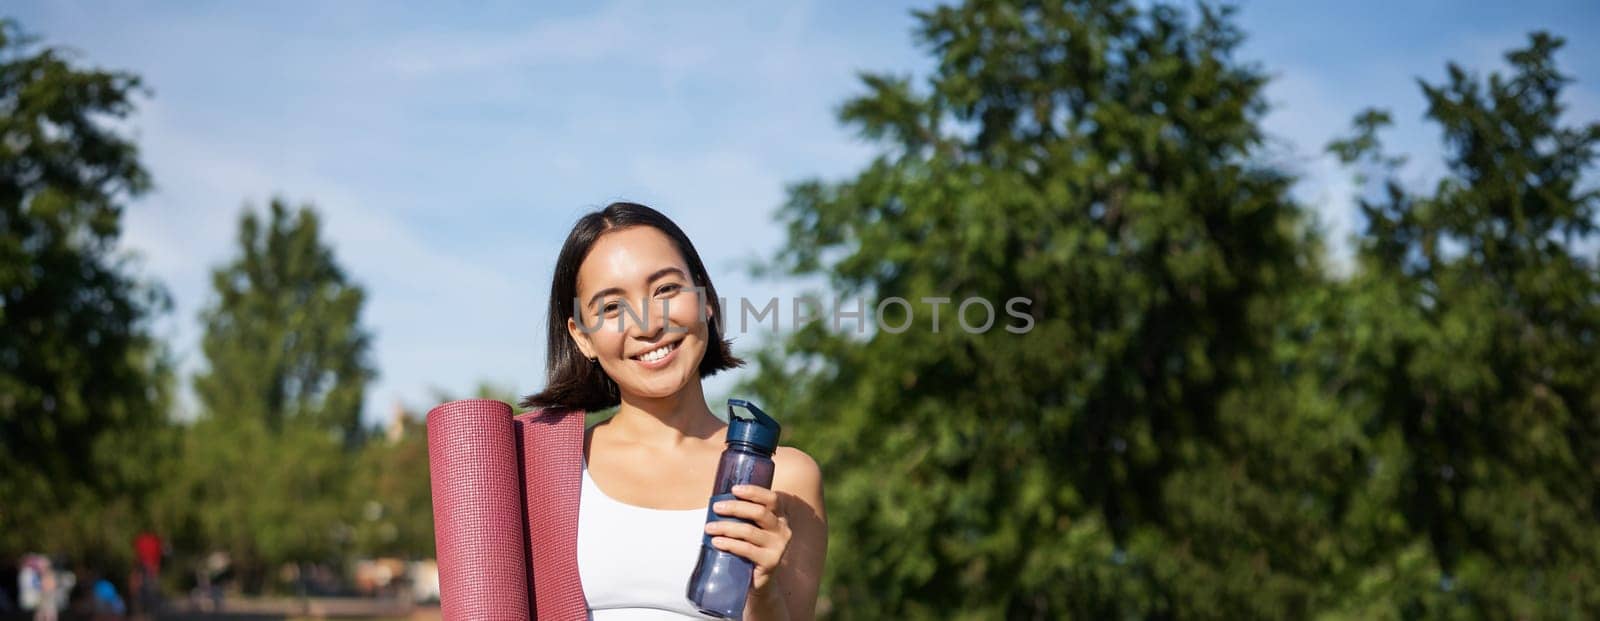 Portrait of young slim and healthy korean girl doing workout in park, standing with water bottle and rubber mat for execises on green lawn, smiling happily by Benzoix